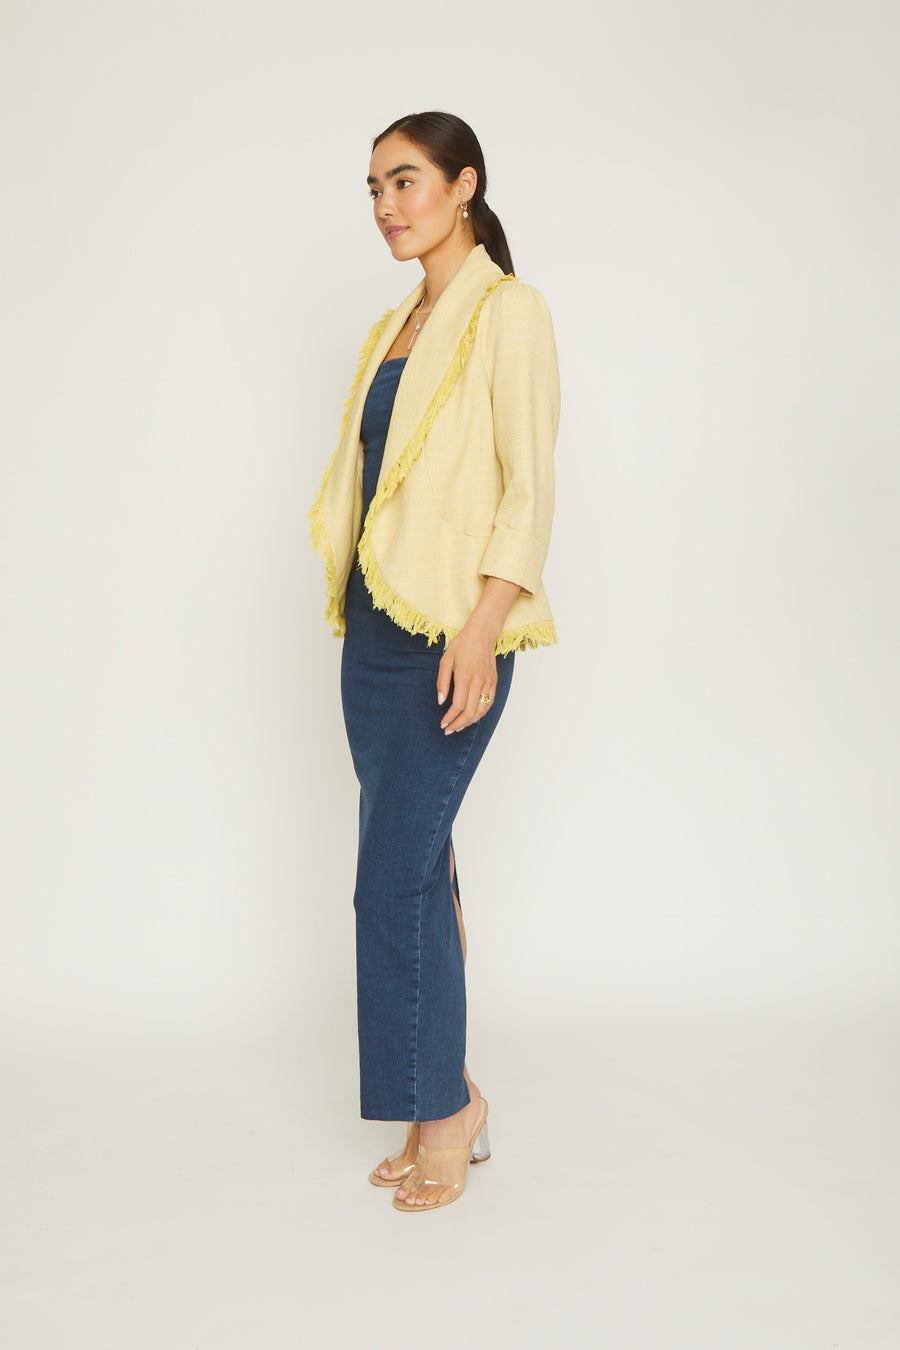 No Srcipt image - Images of 2 of 7 Shawl tweed jacket, fringe details, 3/4 sleeve. yellow color, open front